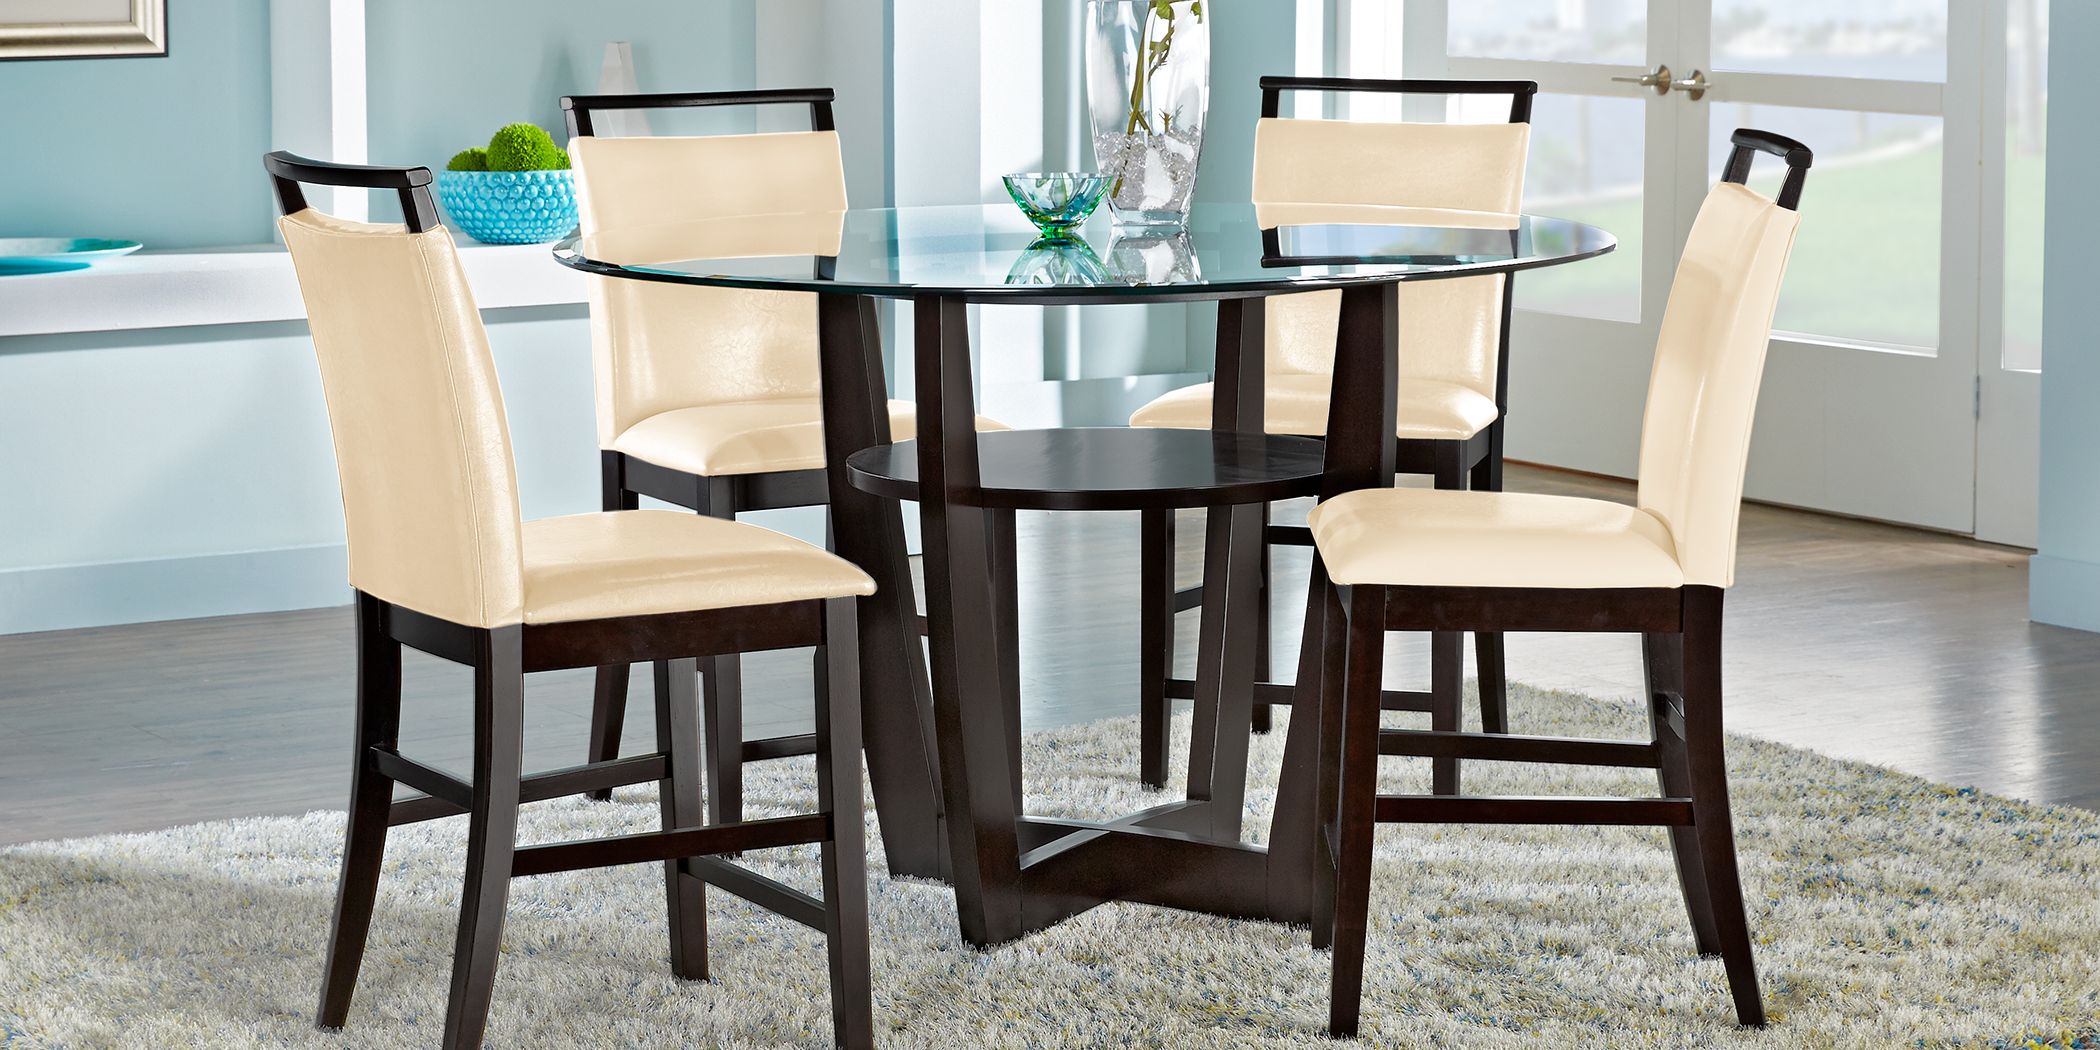 Glass Top Dining Room Table Sets For, Small Round Black Dining Table And 4 Chairs Set Of 6